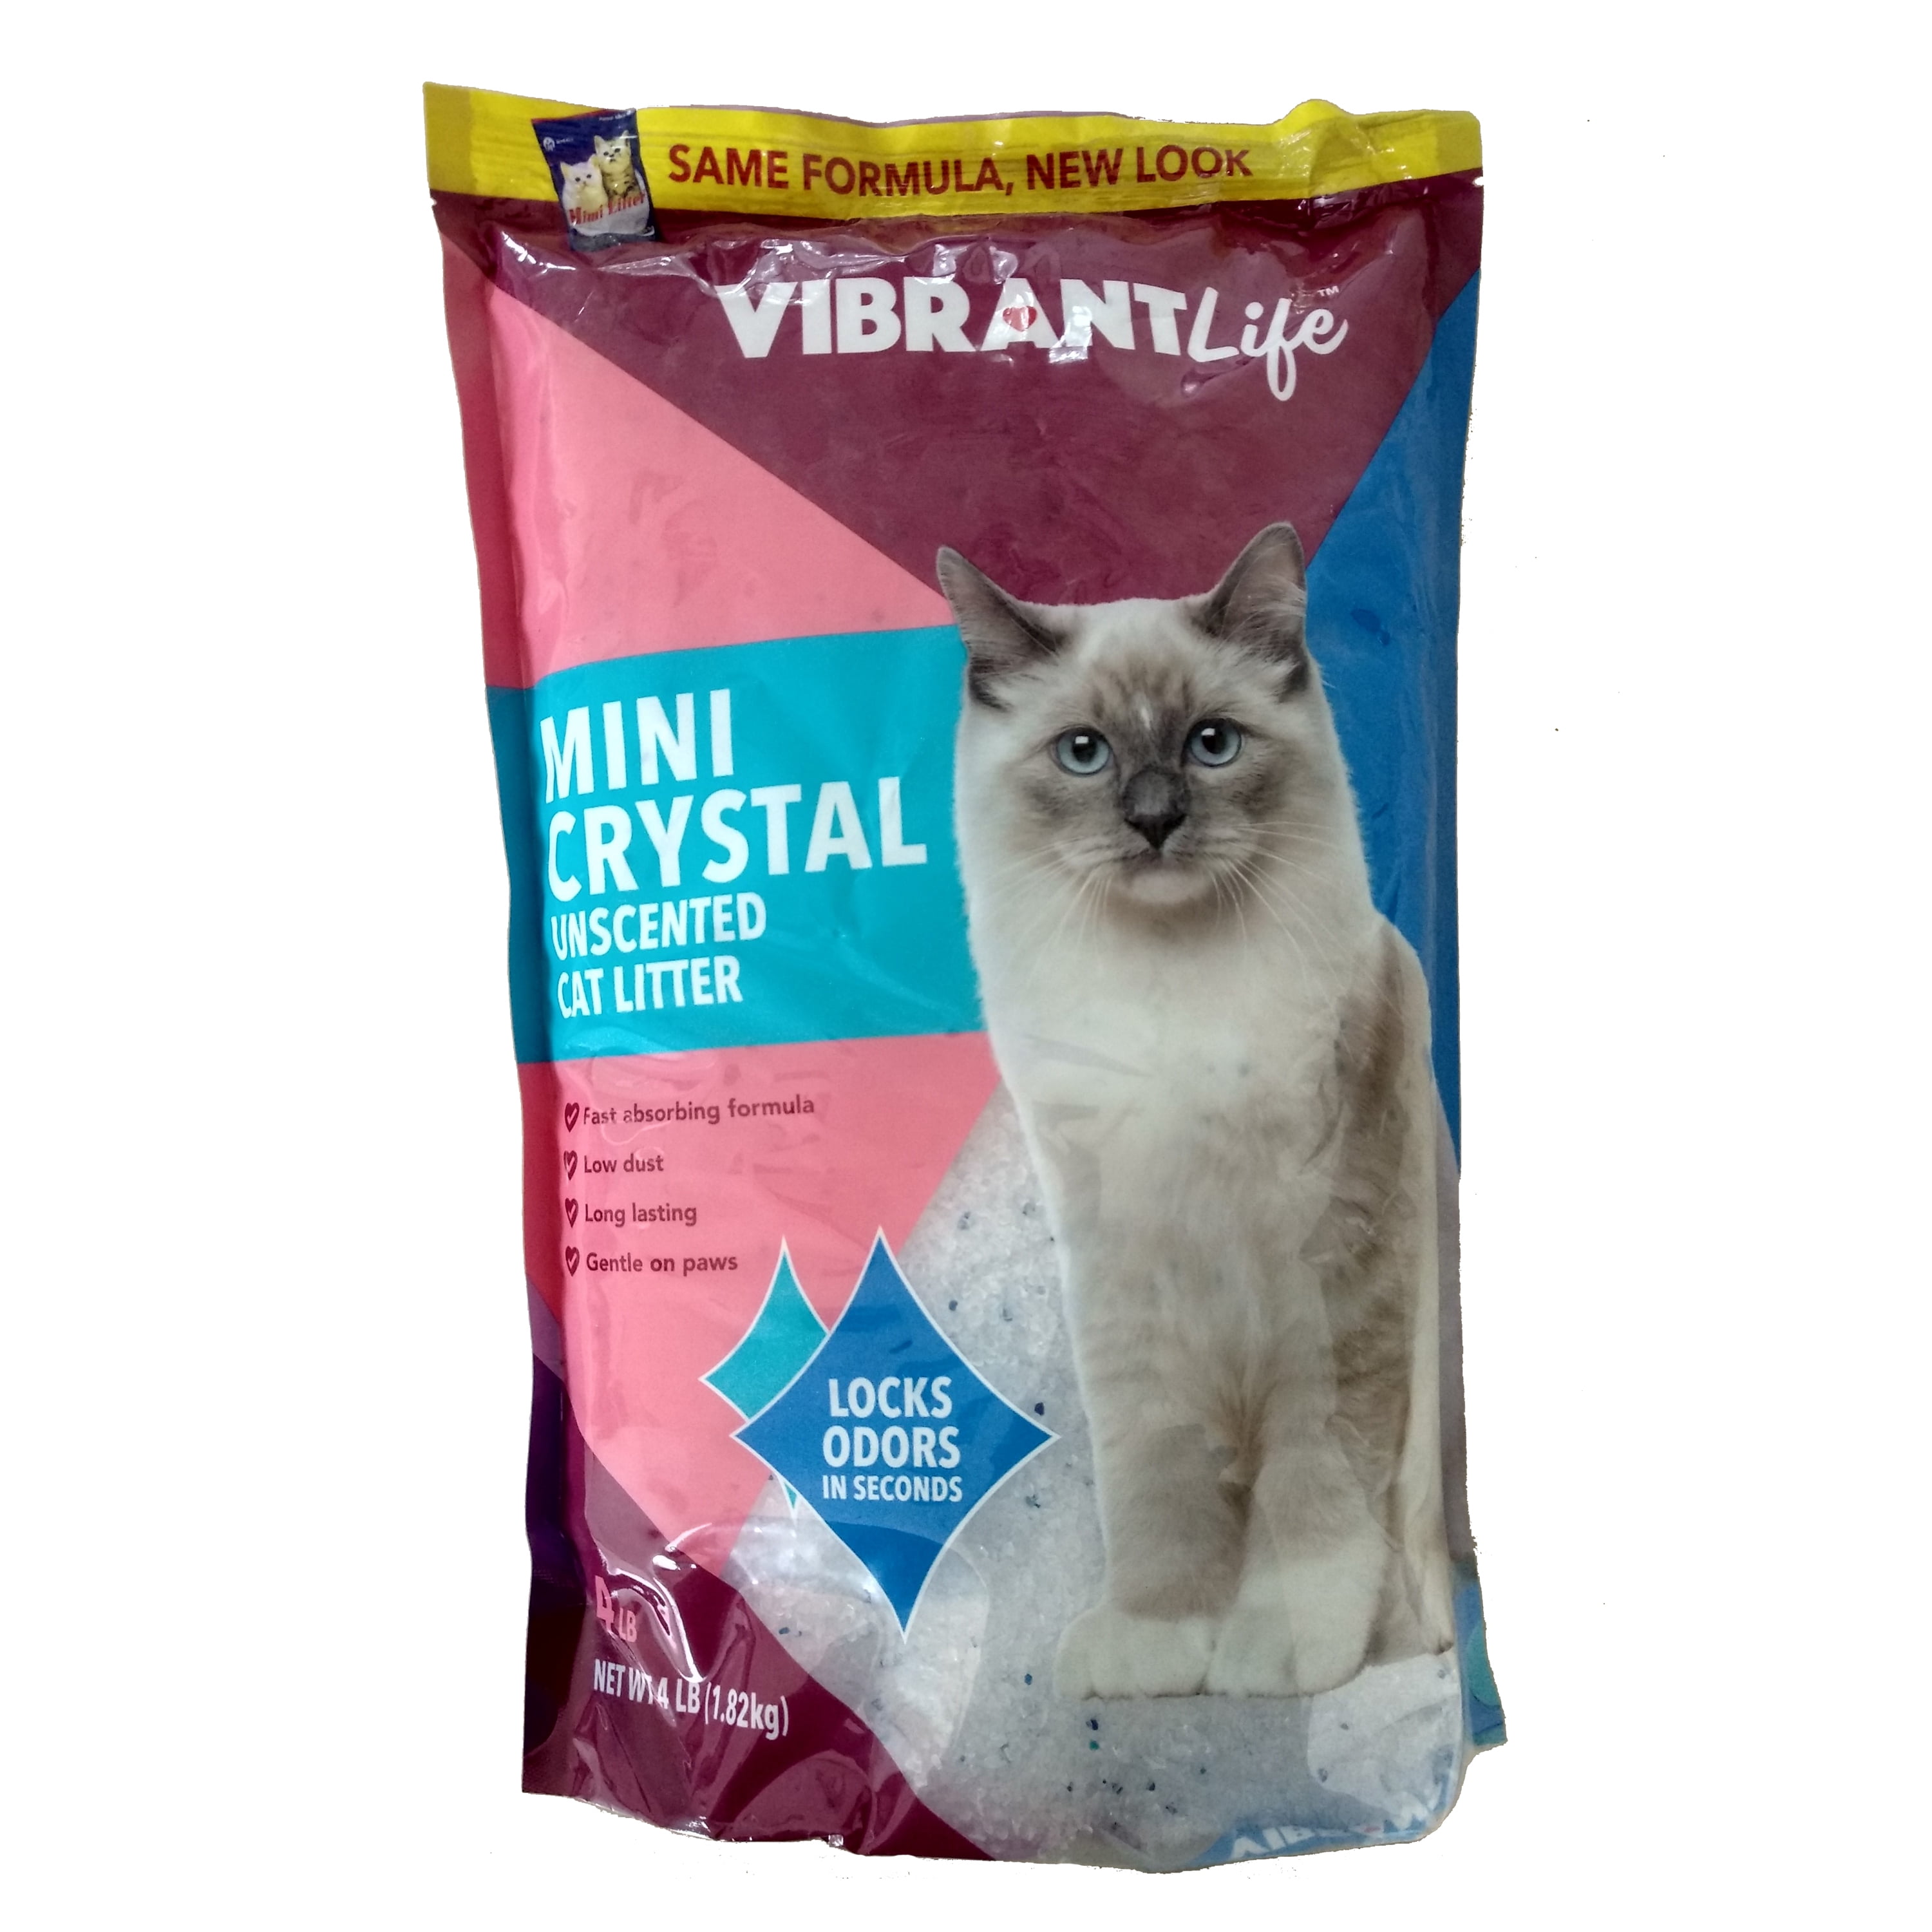 Vibrant Life Mini Crystal Cat Litter, Unscented, 4 lbs